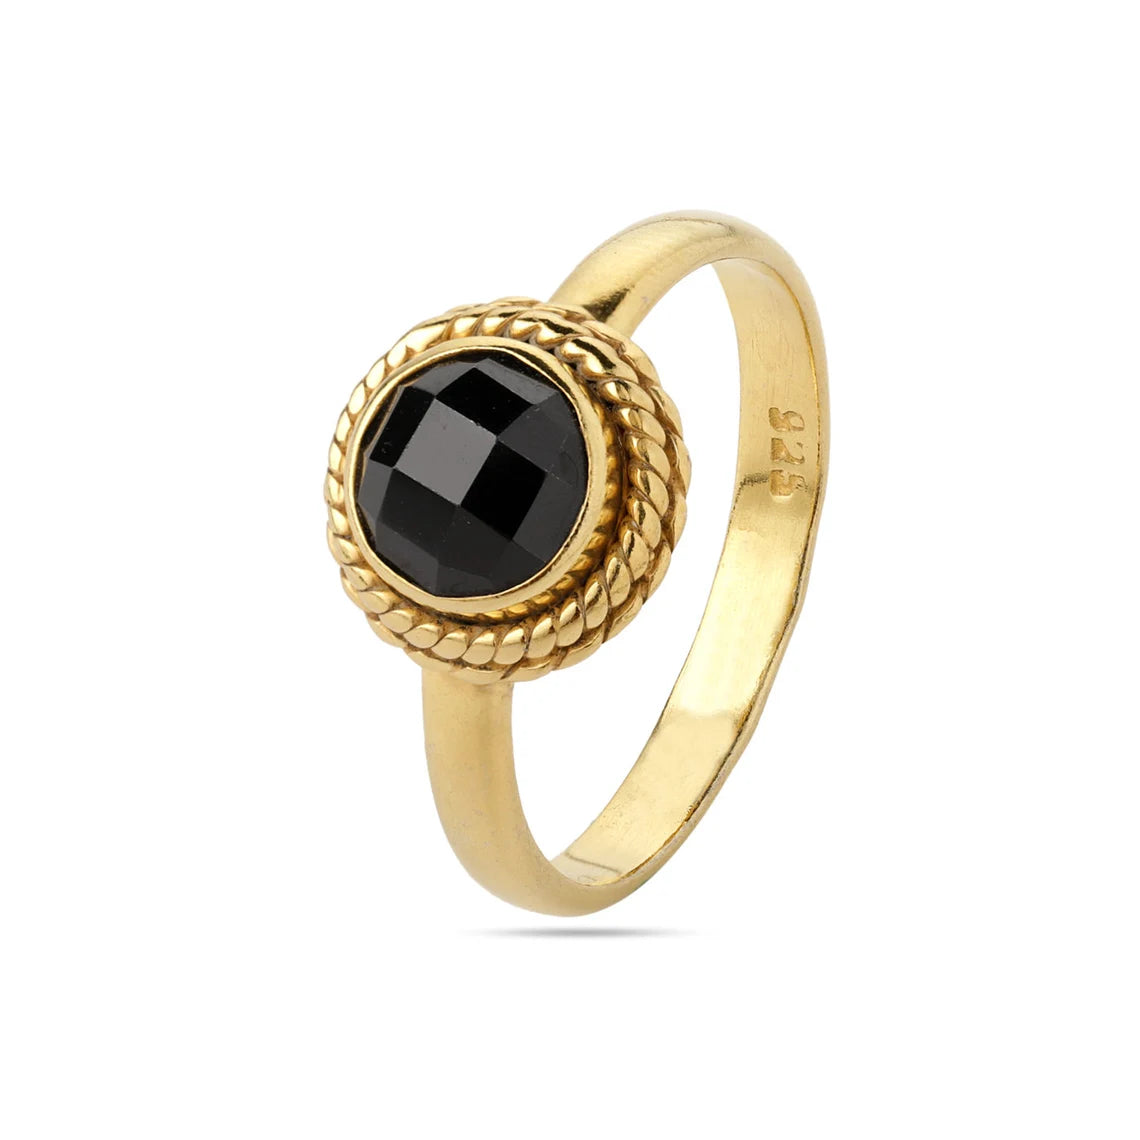 Onyx Ring Dainty Black Onyx Ring Gold Round Cut Ring Onyx Wedding Ring Solitaire Stacking Ring Black Onyx Jewelry